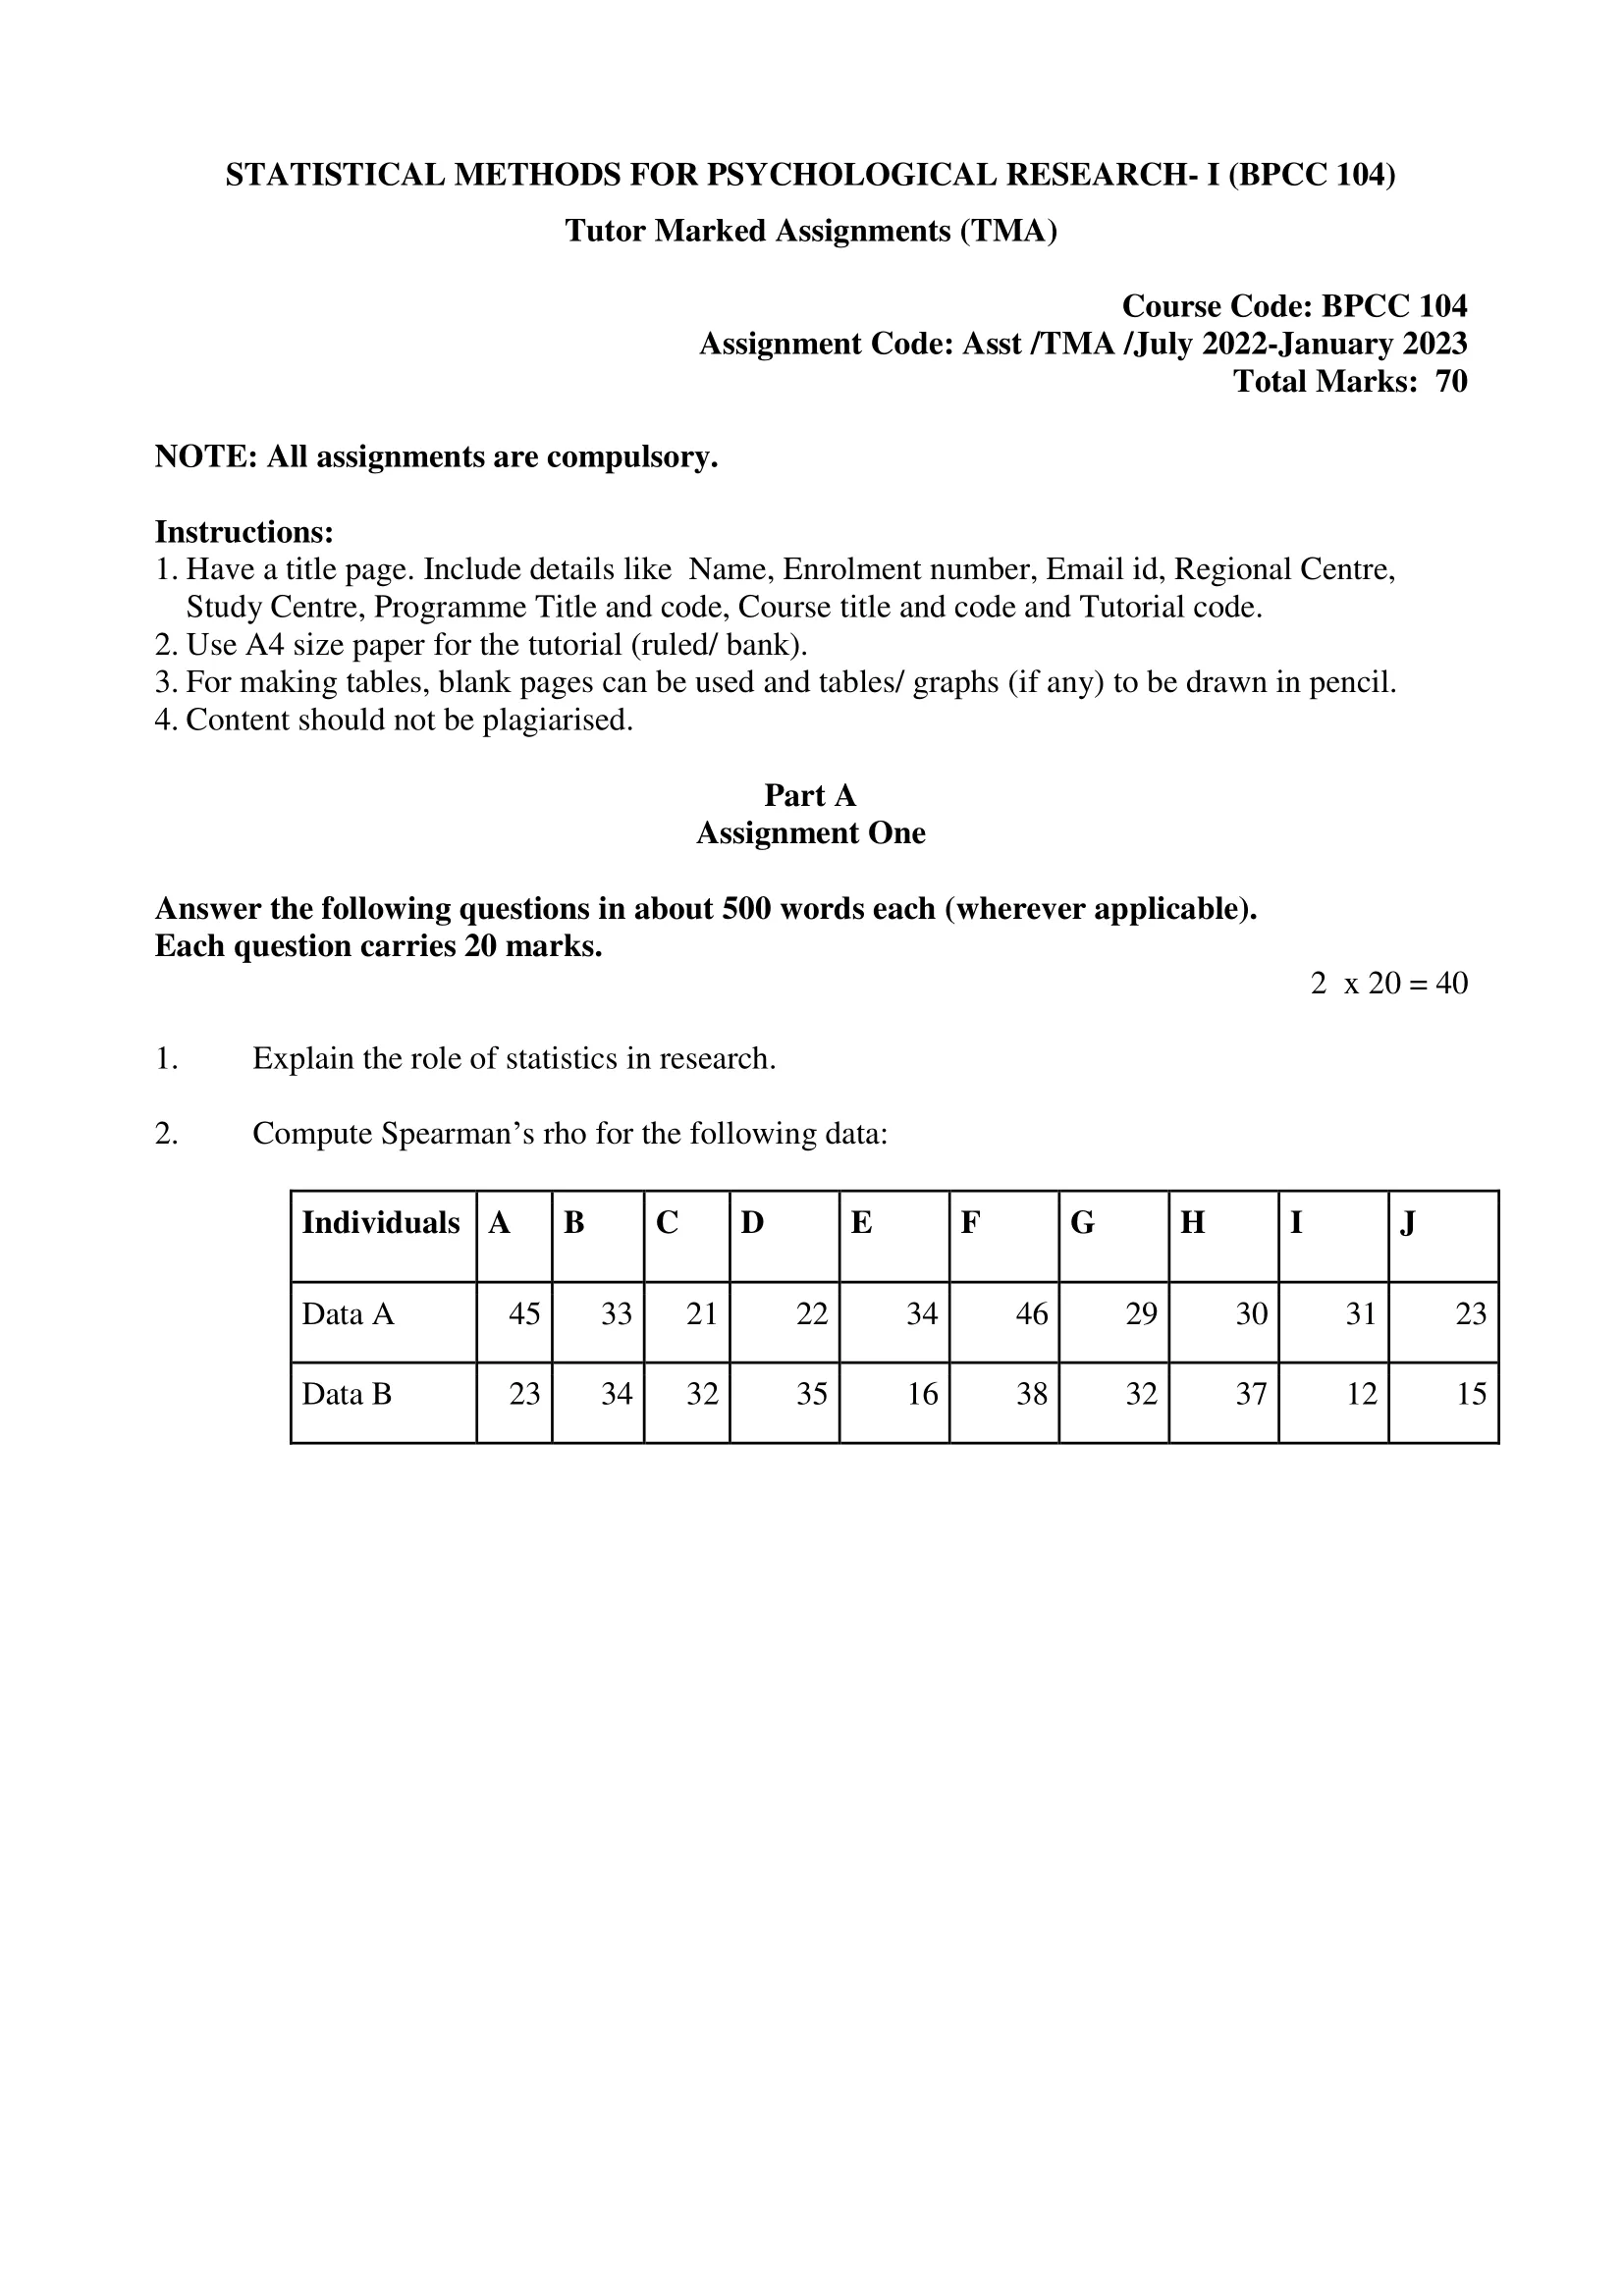 BPCC-104 IGNOU BAG Solved Assignment-STATISTICAL METHODS FOR PSYCHOLOGICAL RESERACH-I